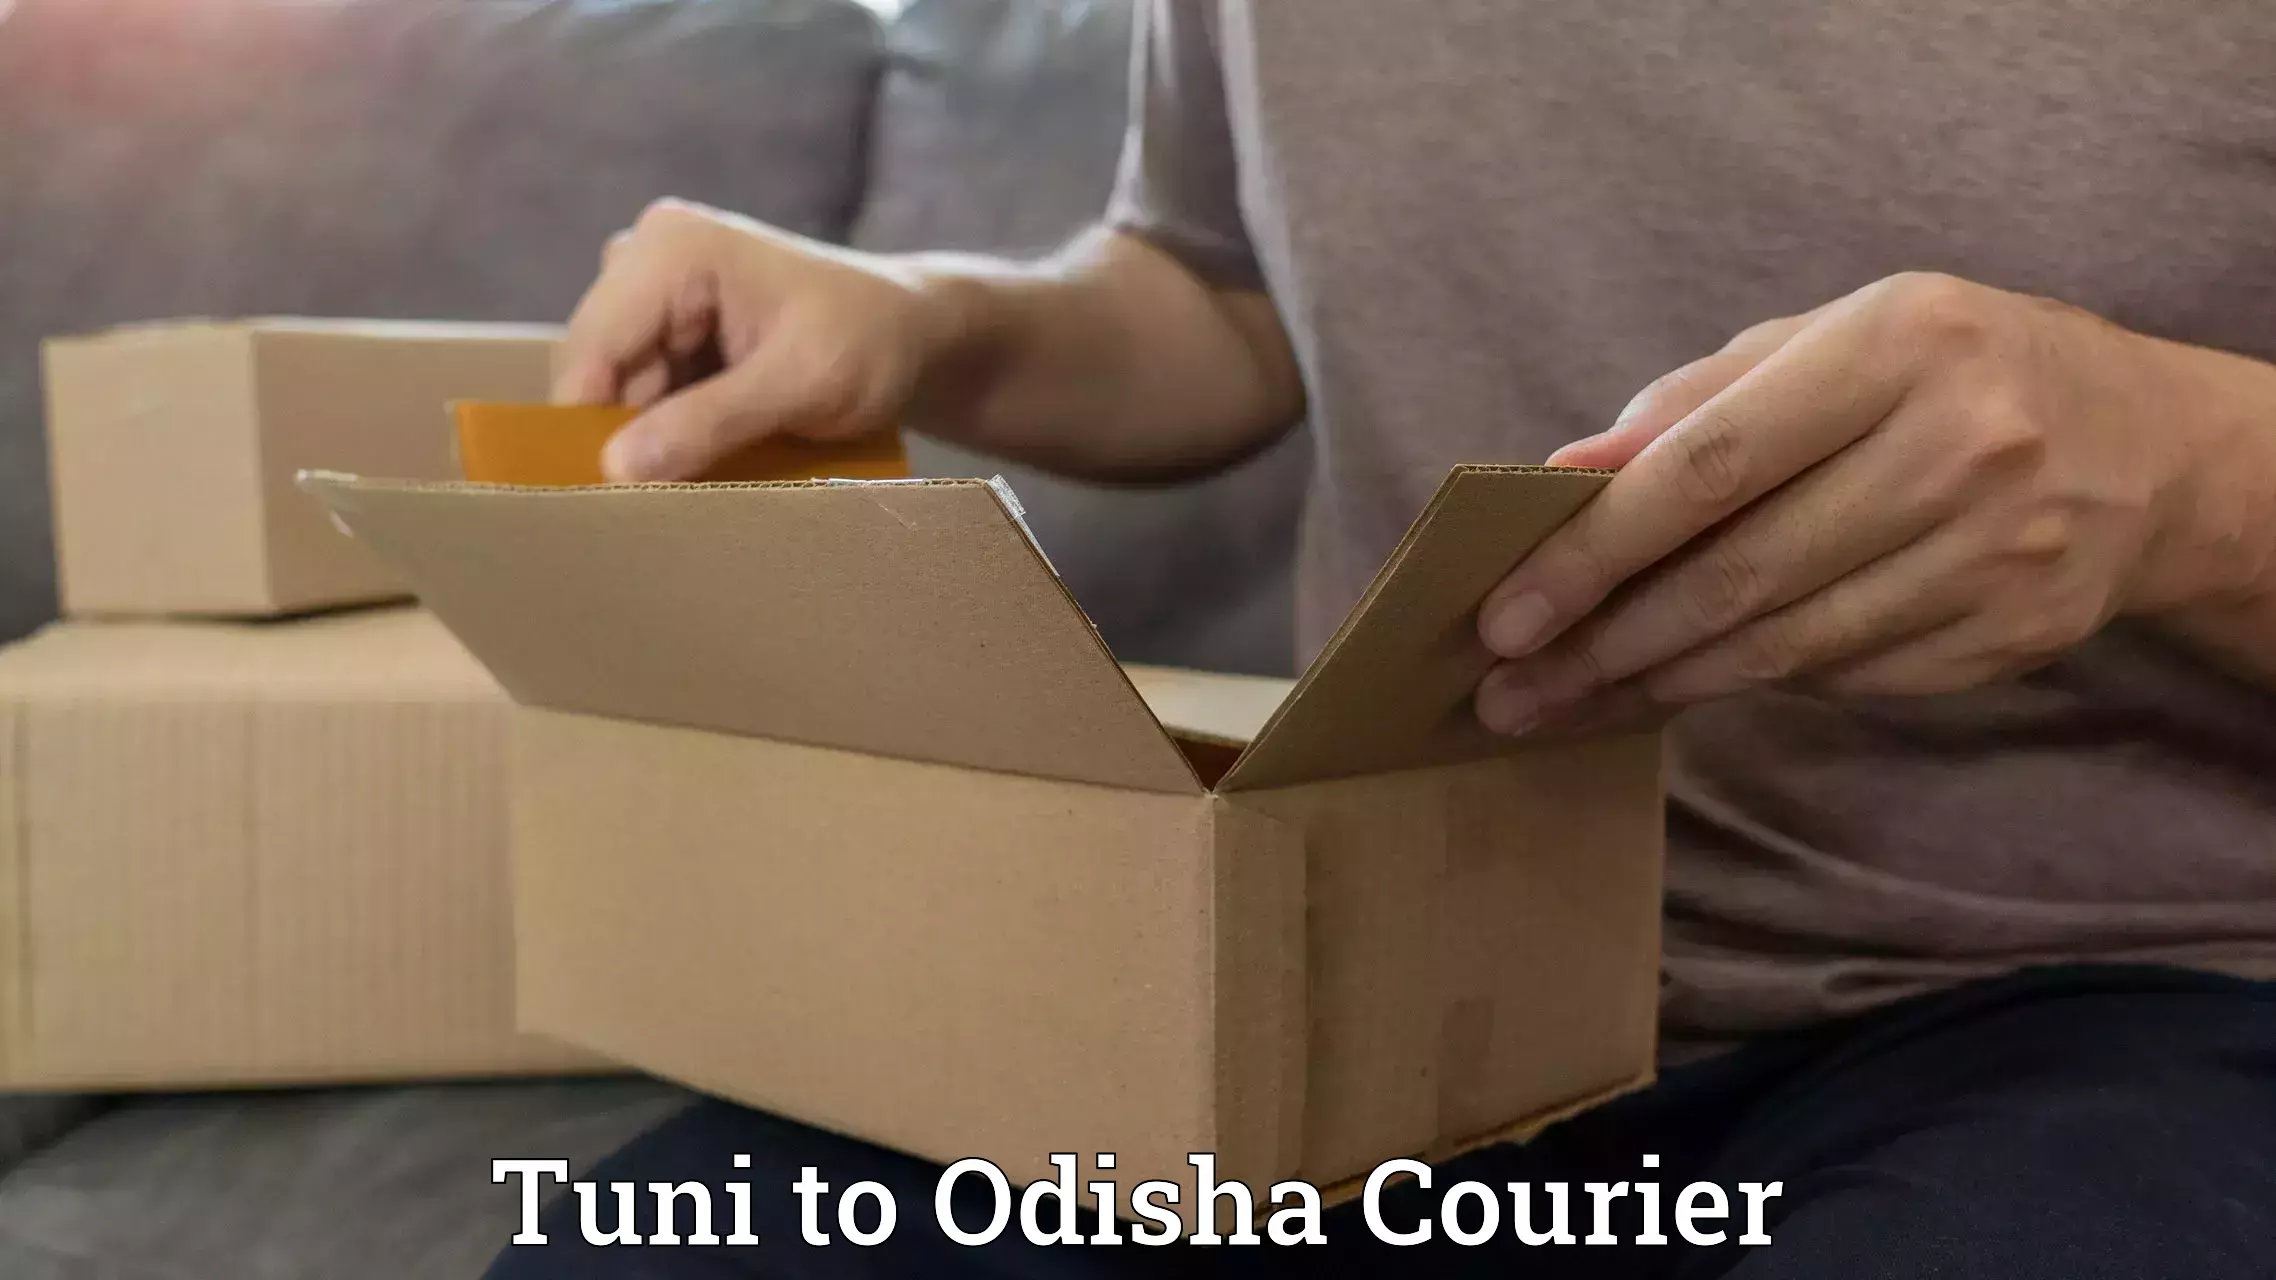 User-friendly courier app Tuni to Mathili